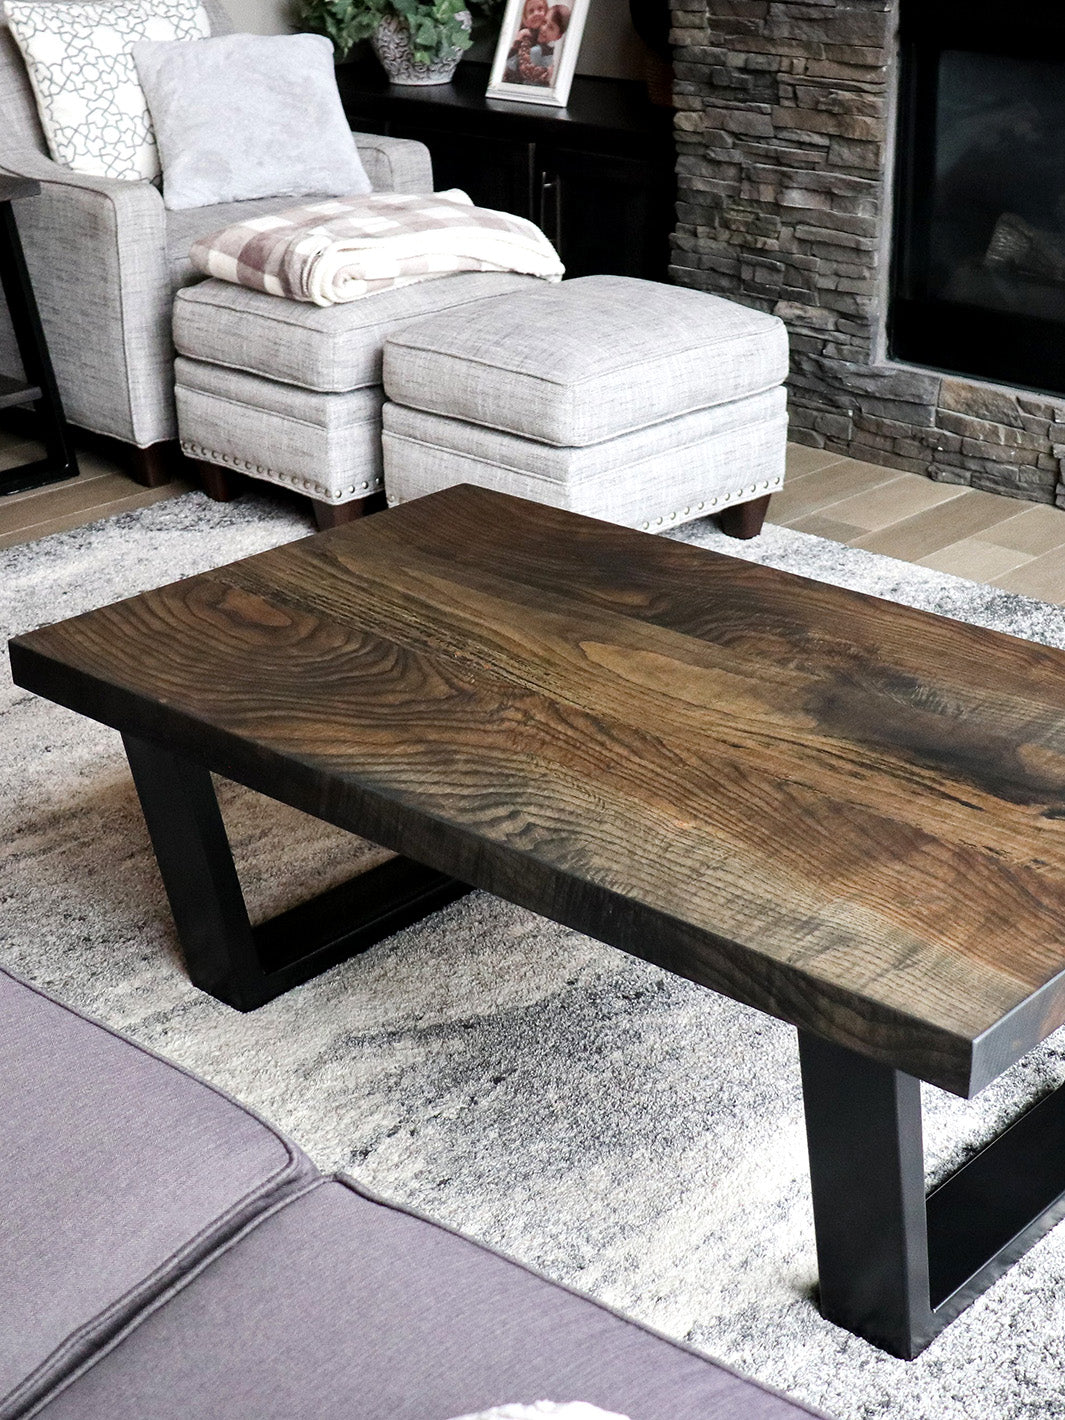 Modern Black Charcoal Ash Wood and Tapered Steel Coffee Table Earthly Comfort Coffee Tables 1578-4